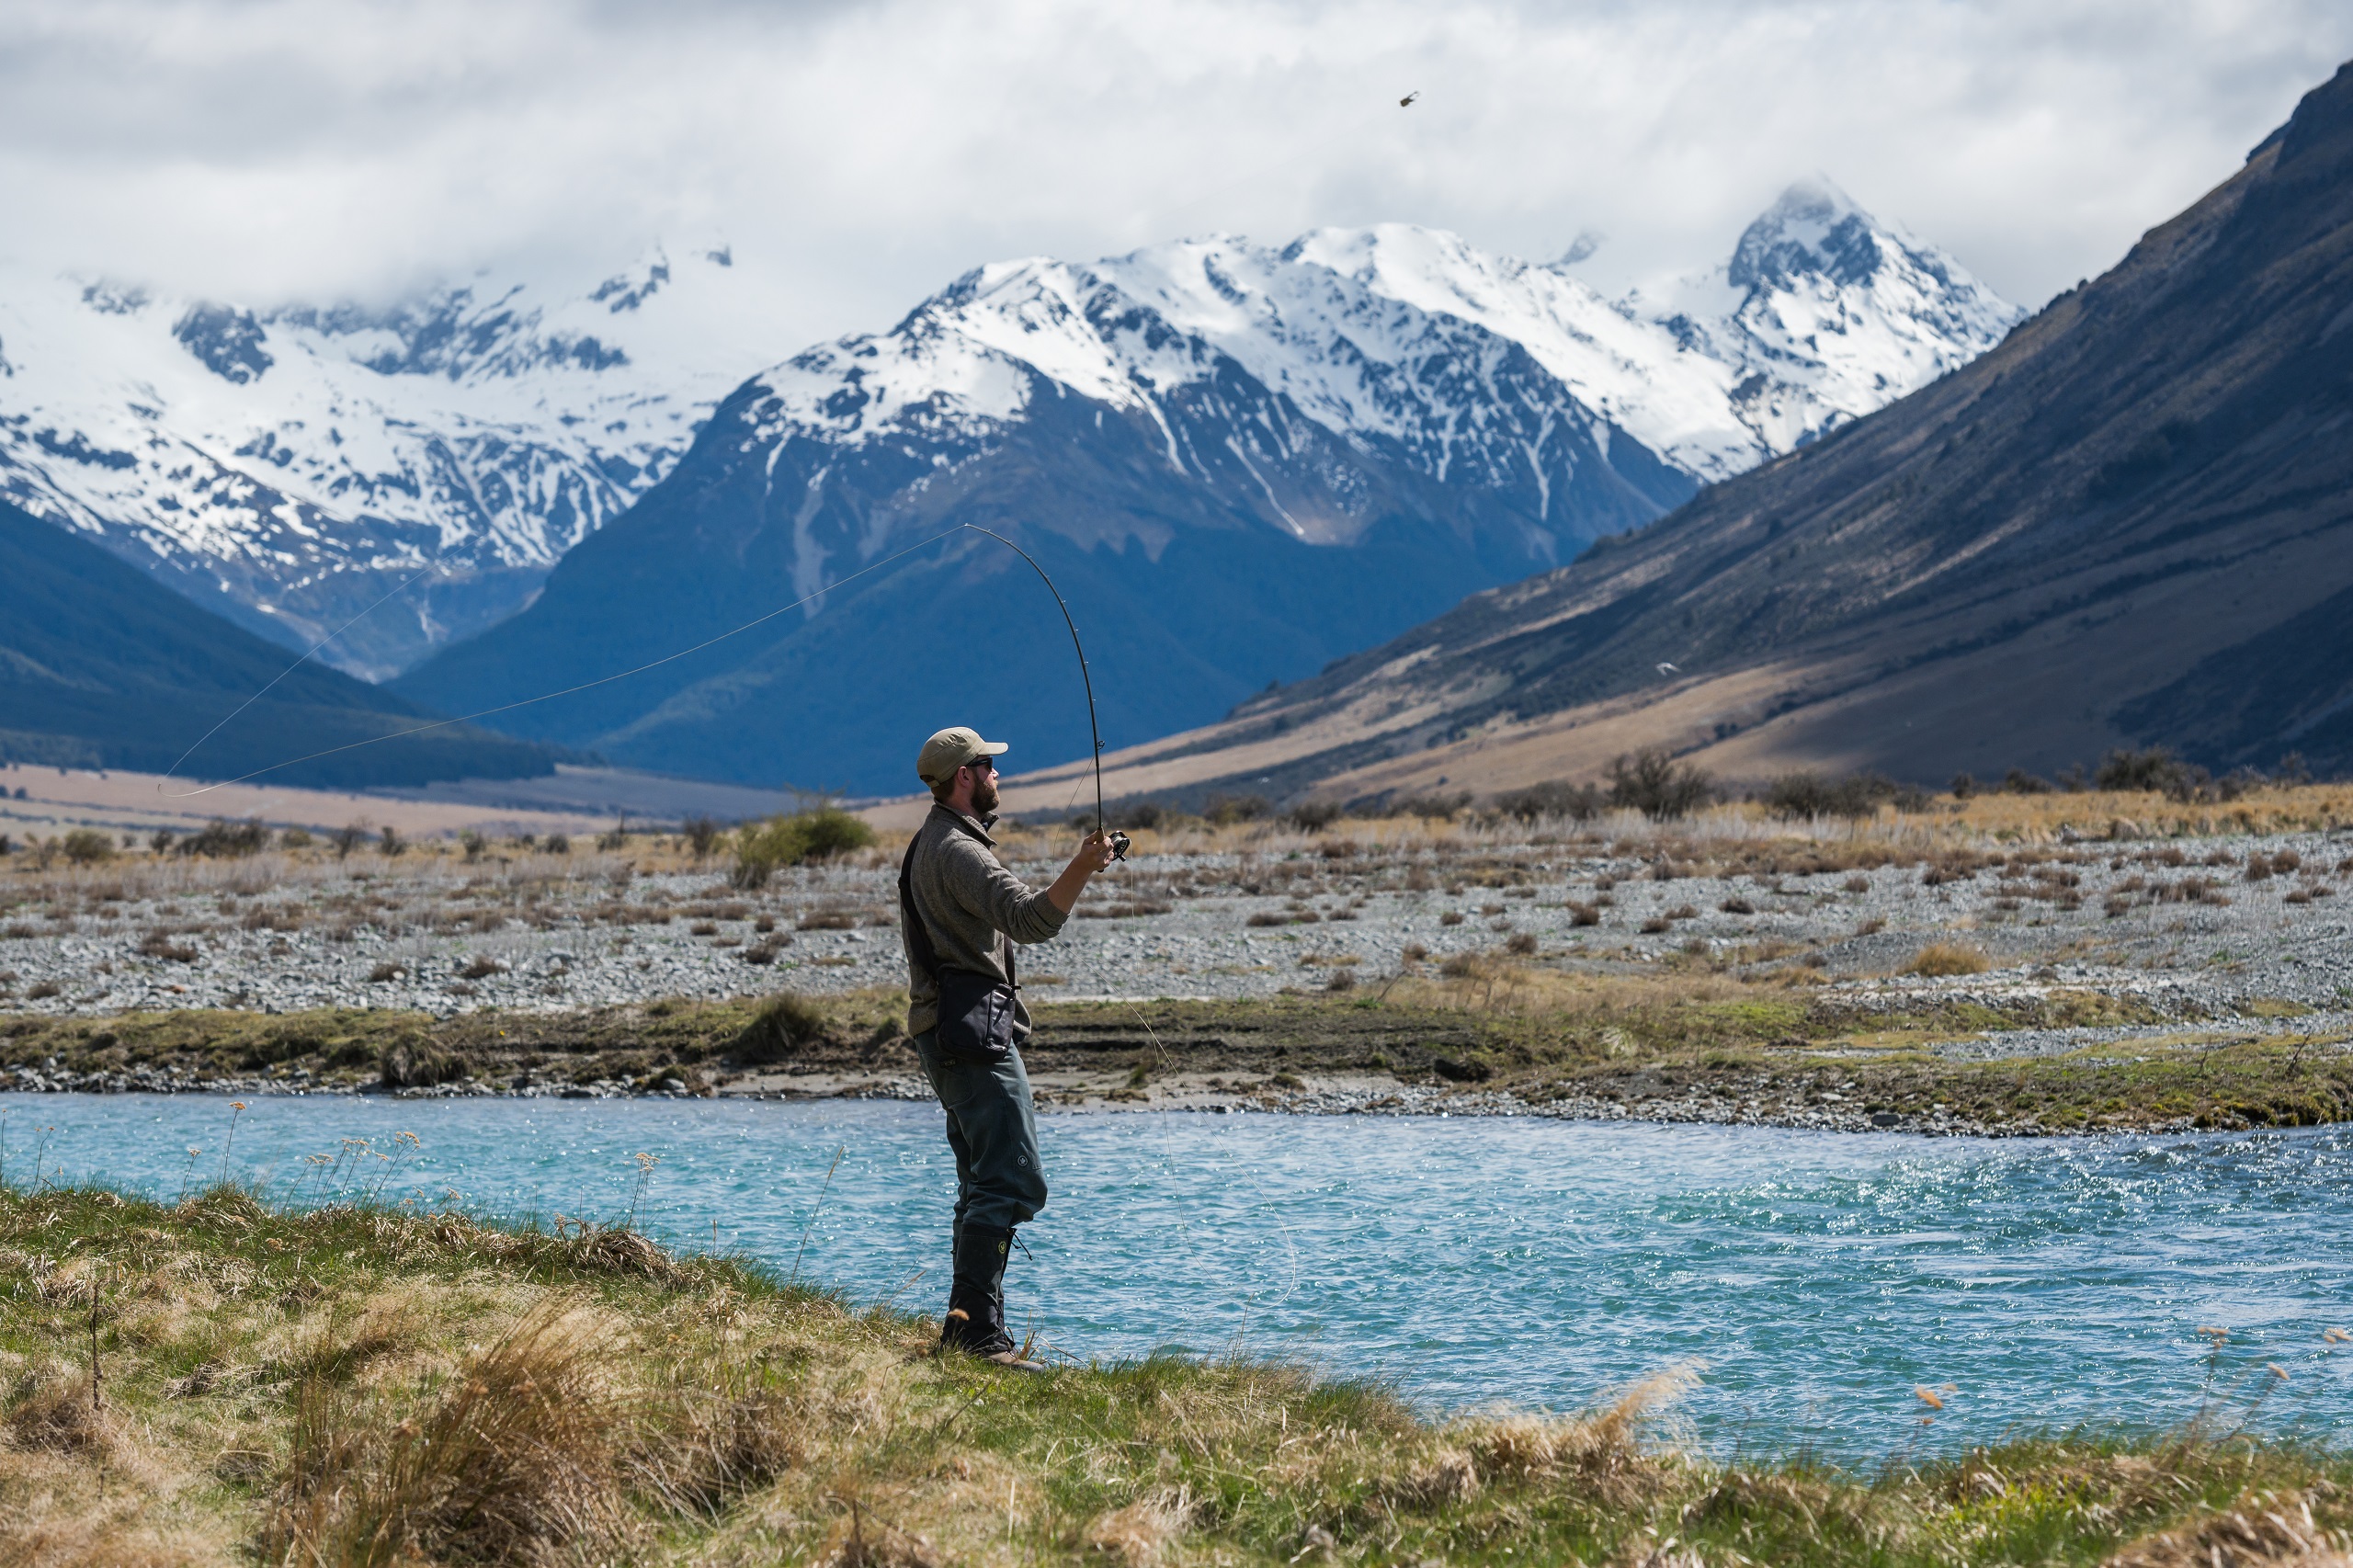 Man fly fishing on Ahuriri River with mountains in the background